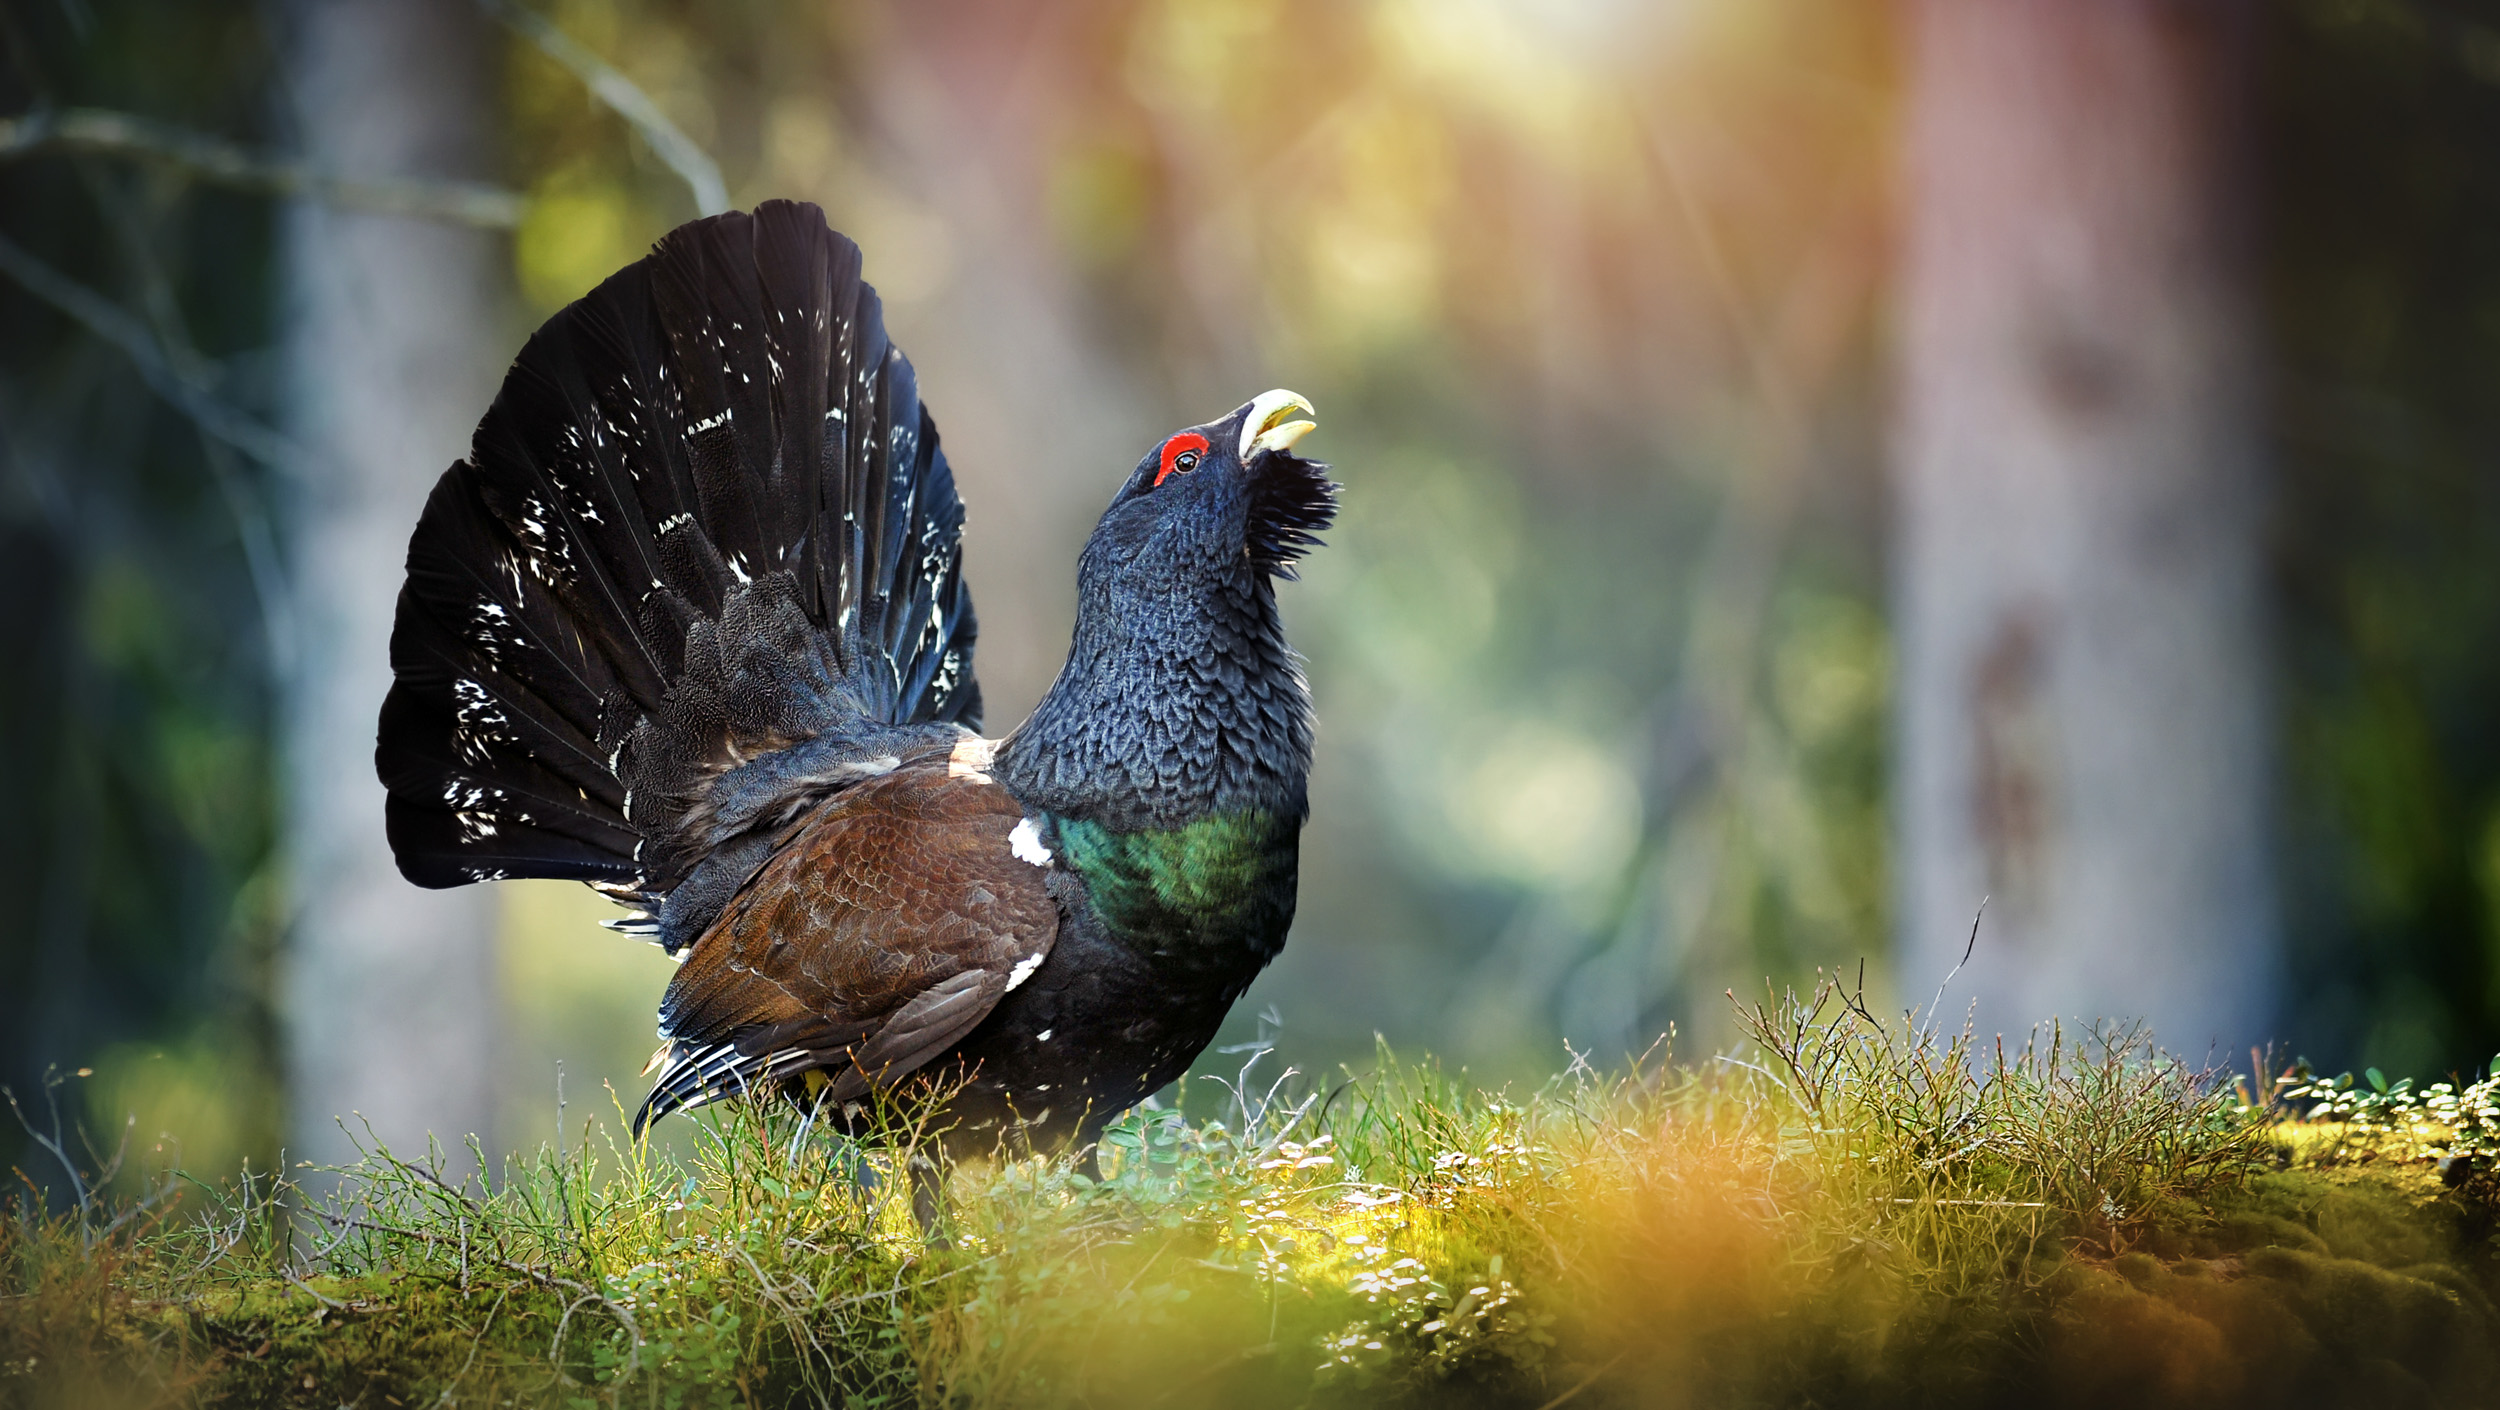 A male Capercaillie walking on a grassy woodland floor.